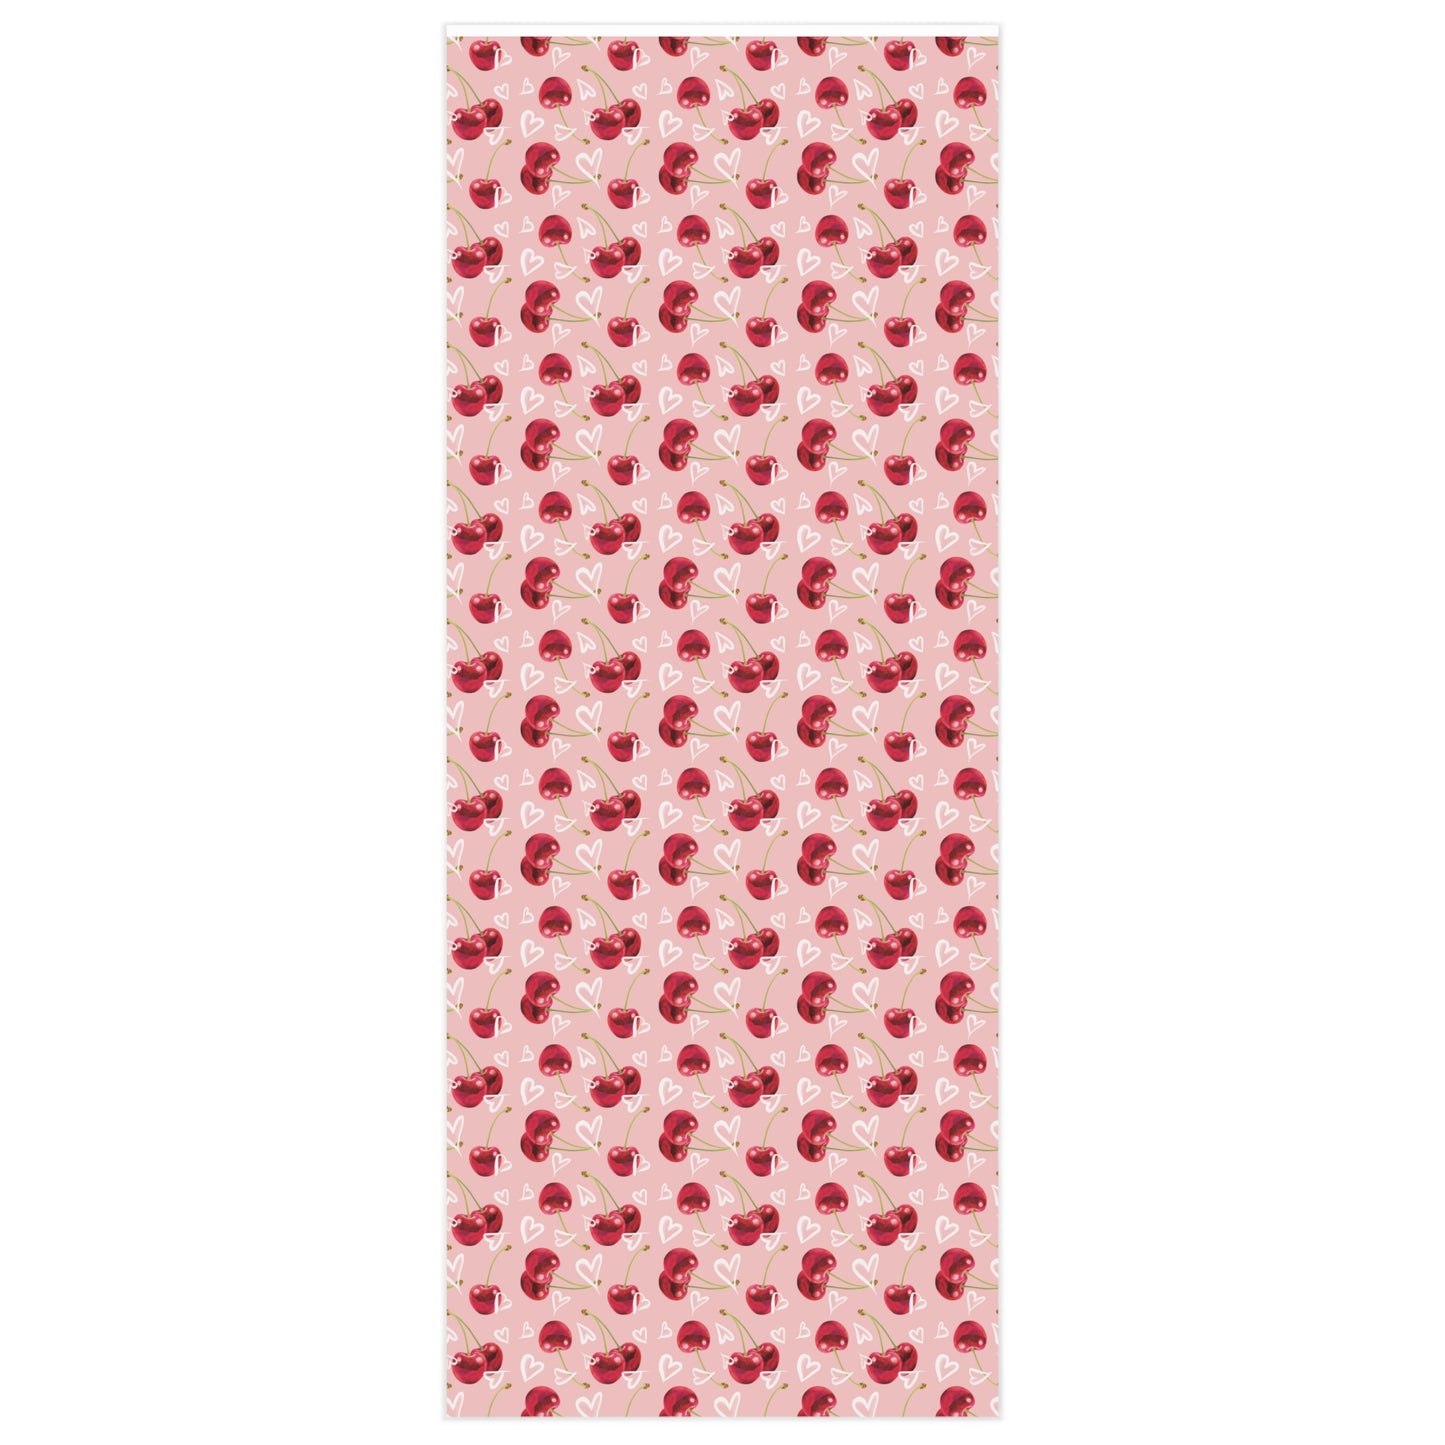 Pink Cherry Love Bomb Wrapping Paper